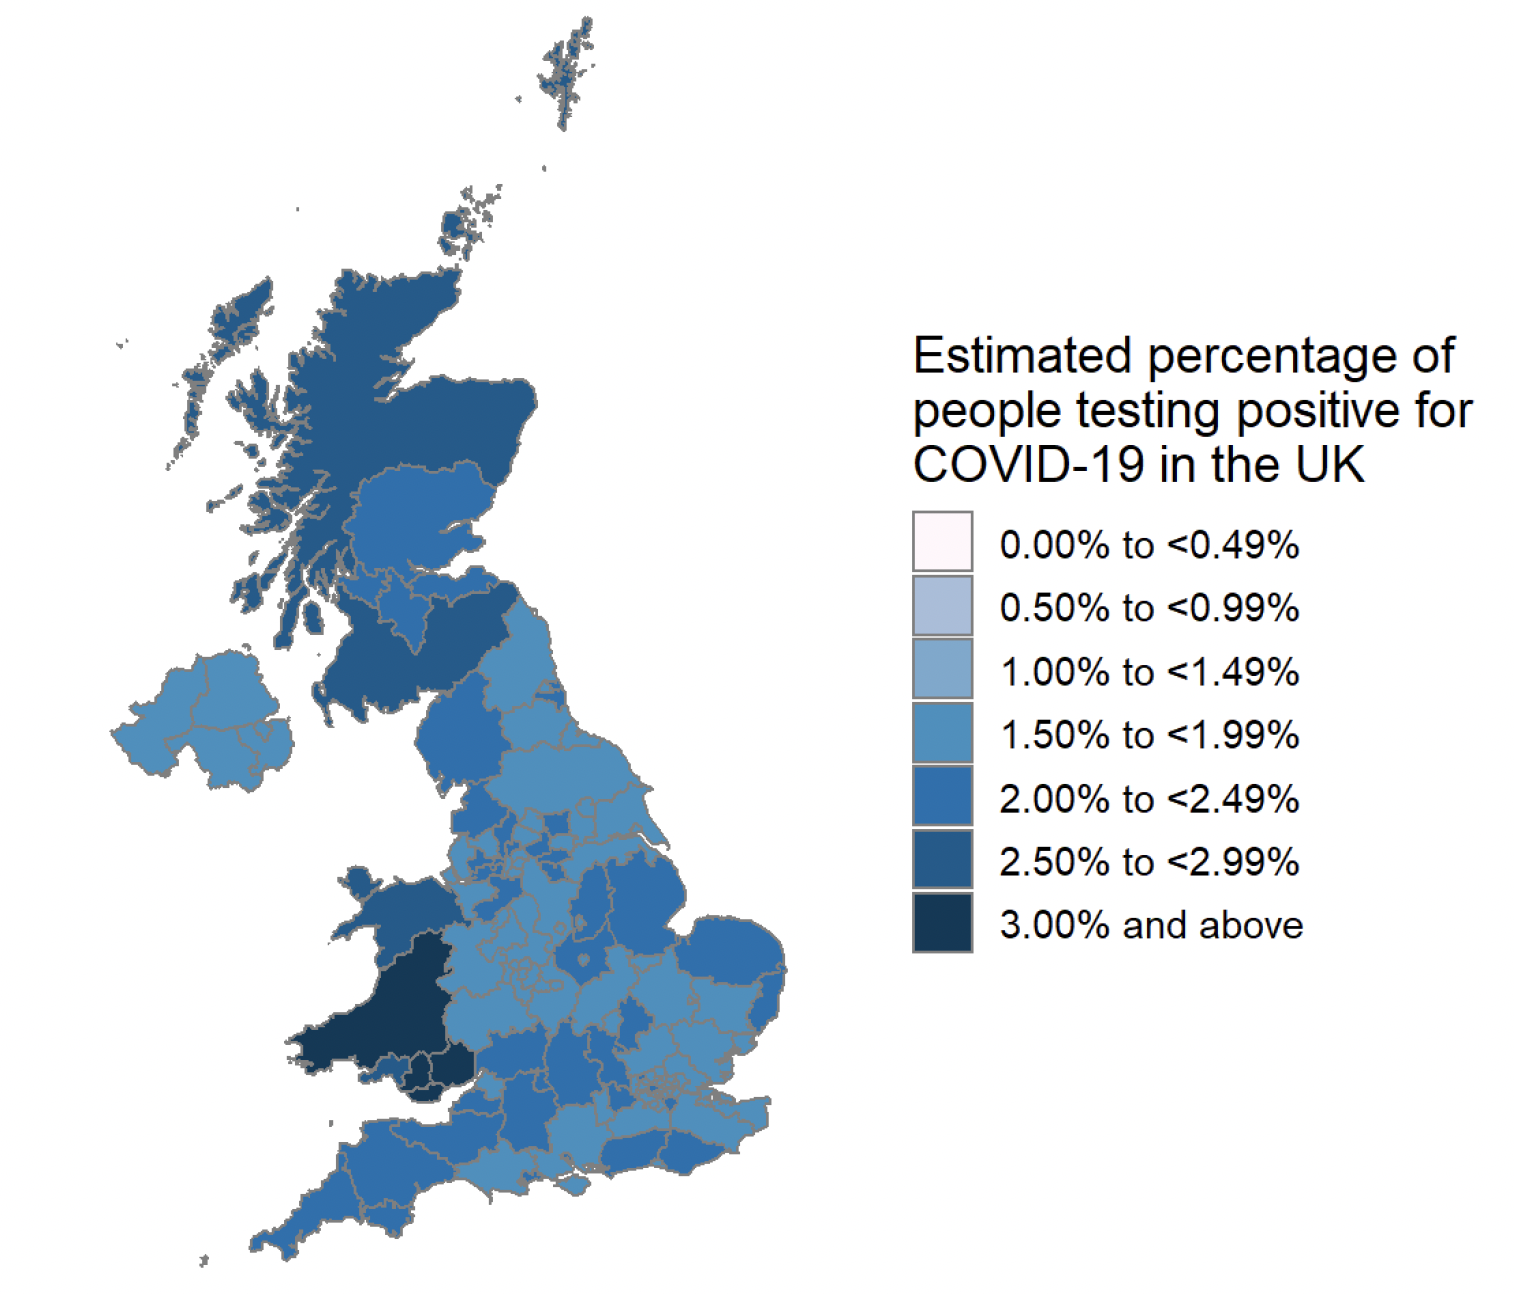 A colour coded map of the UK showing modelled estimates of the percentage of people living in private households within each CIS sub-region who would have tested positive for COVID-19 in the week 7 to 13 May 2022. The map ranges from light blue for 1.50% to 1.99%, blue for 2.00% to 2.49%, darker blue for 2.50% to 2.99%, and very dark blue for 3.00% estimated positivity and over. Scotland CIS sub-regions are marked with blue (2.00% to 2.49%) and darker blue (2.50% to 2.99% positivity).